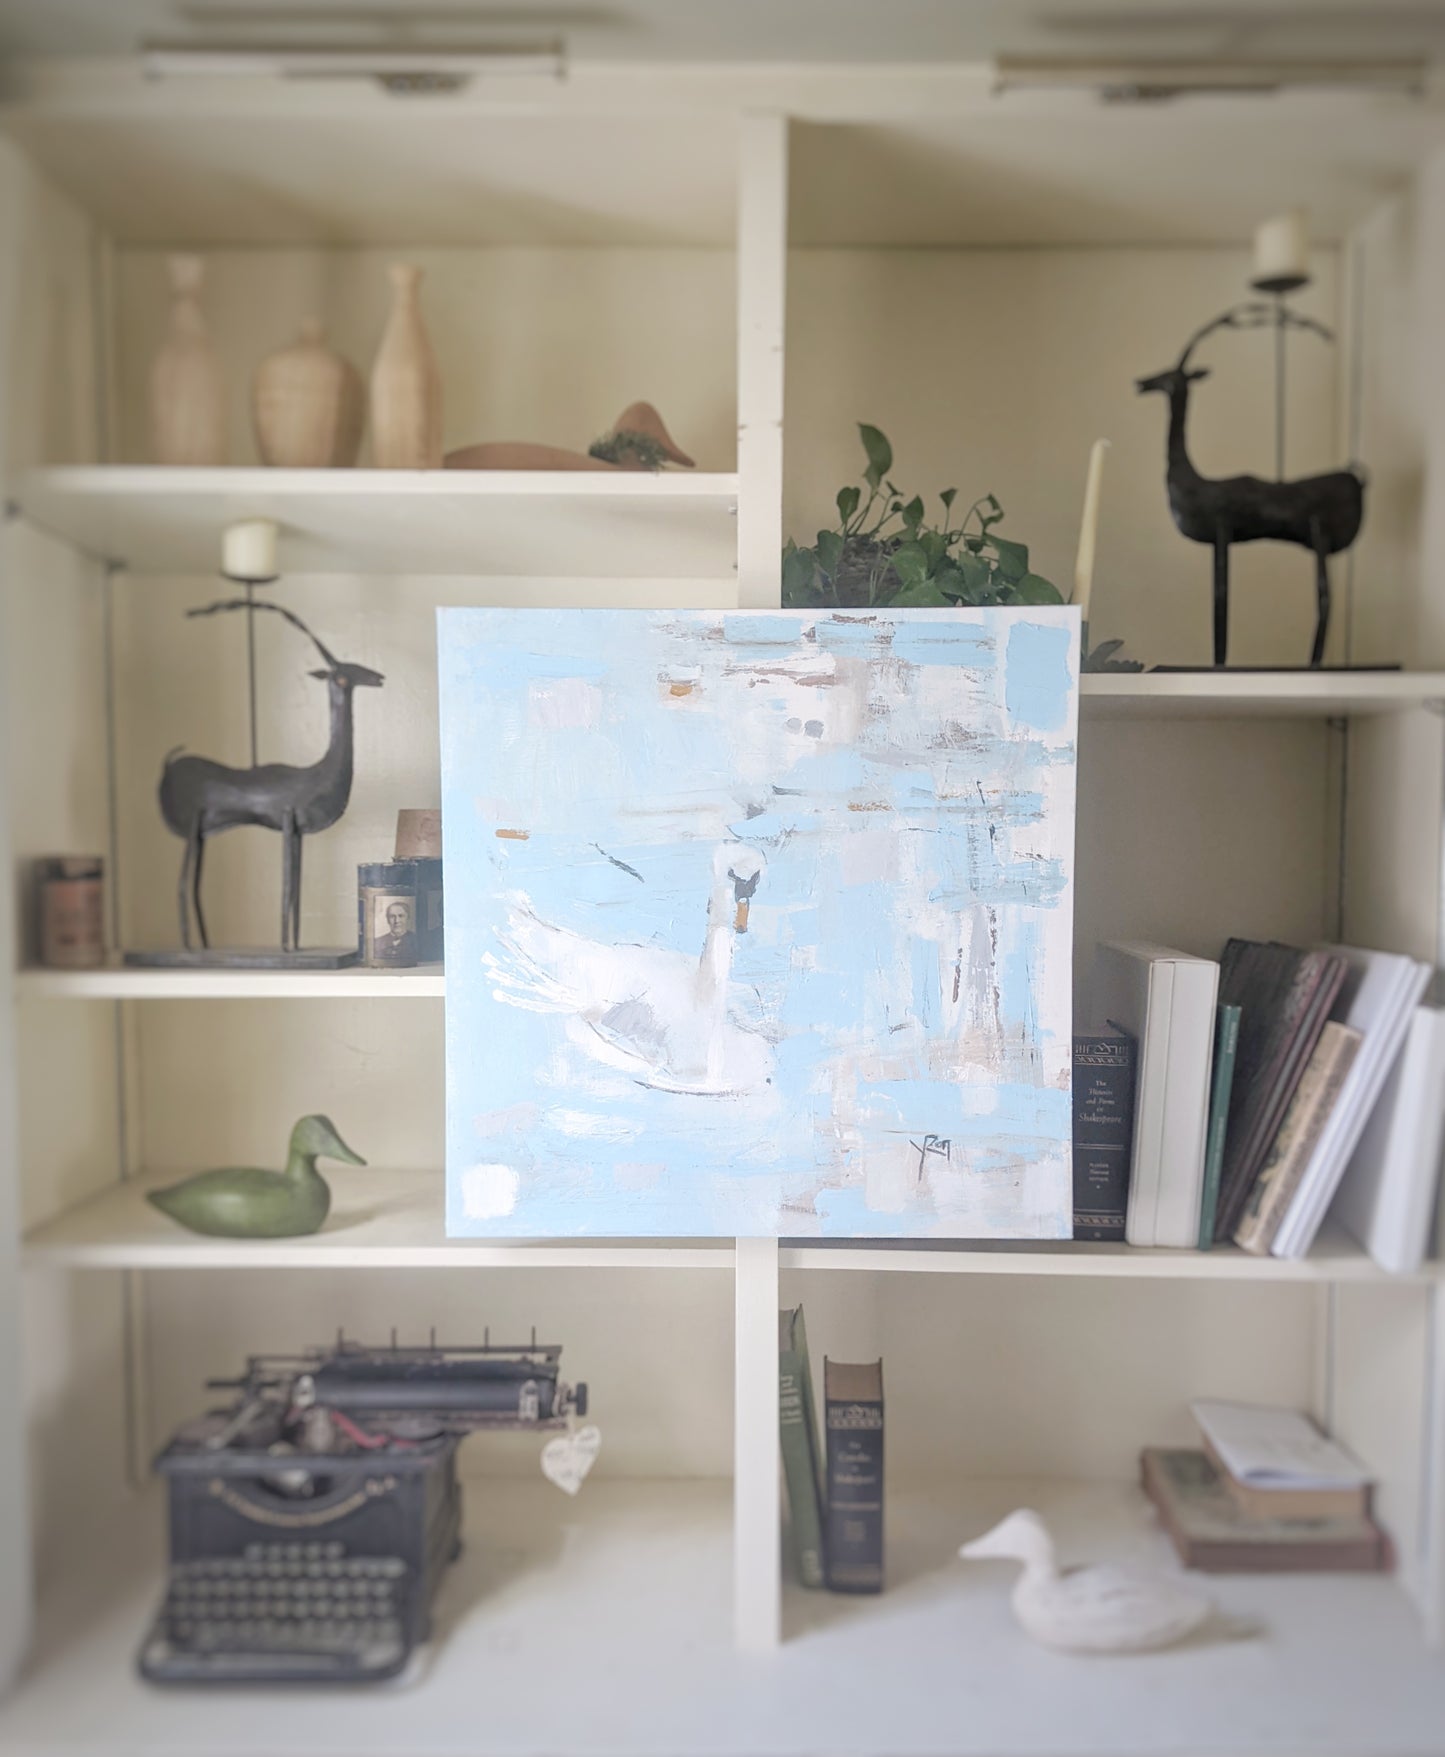 "Swan Song" a coastal original acrylic painting by Yvonne Rondinone in situ as part of the Adventure Awaits art series